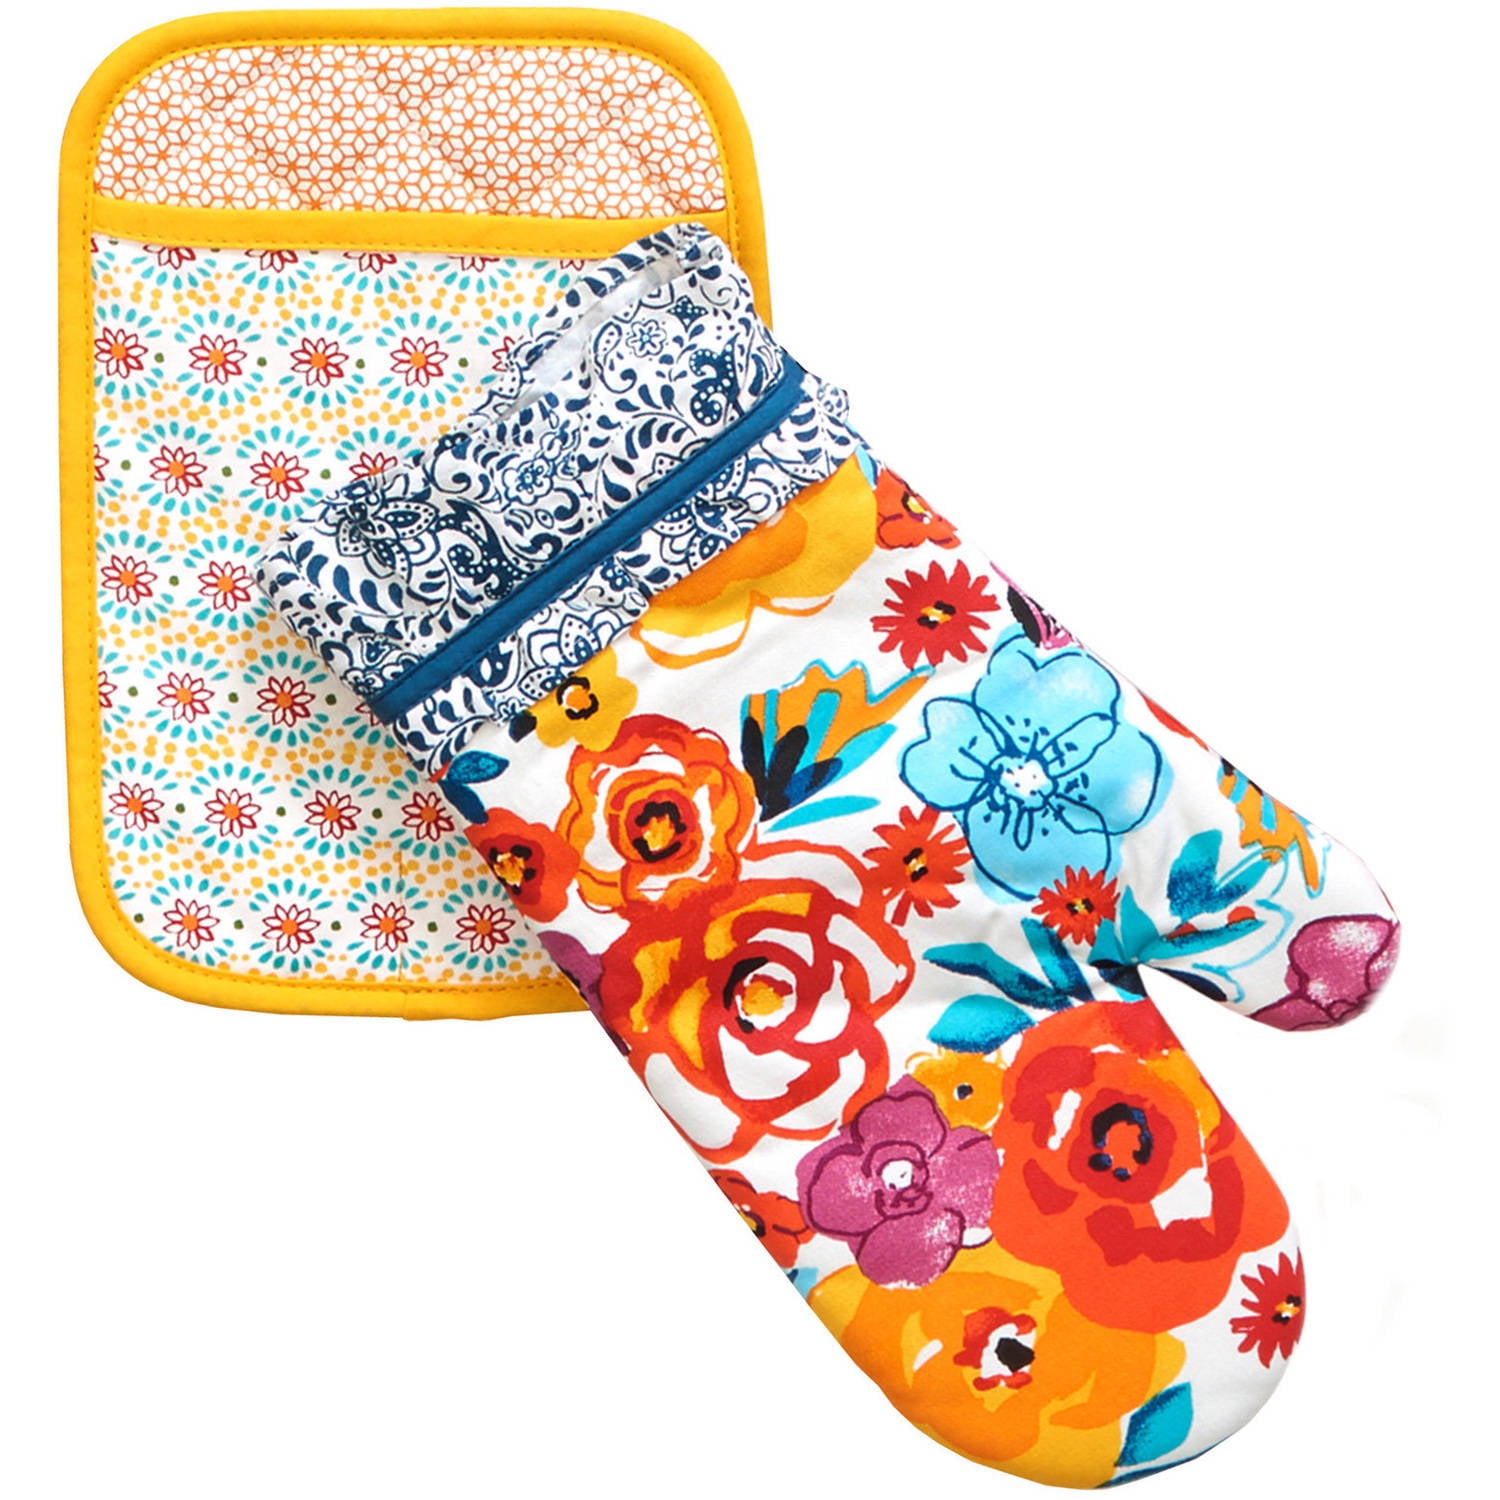 Breadtopia Oven Gloves (pair) - Womens